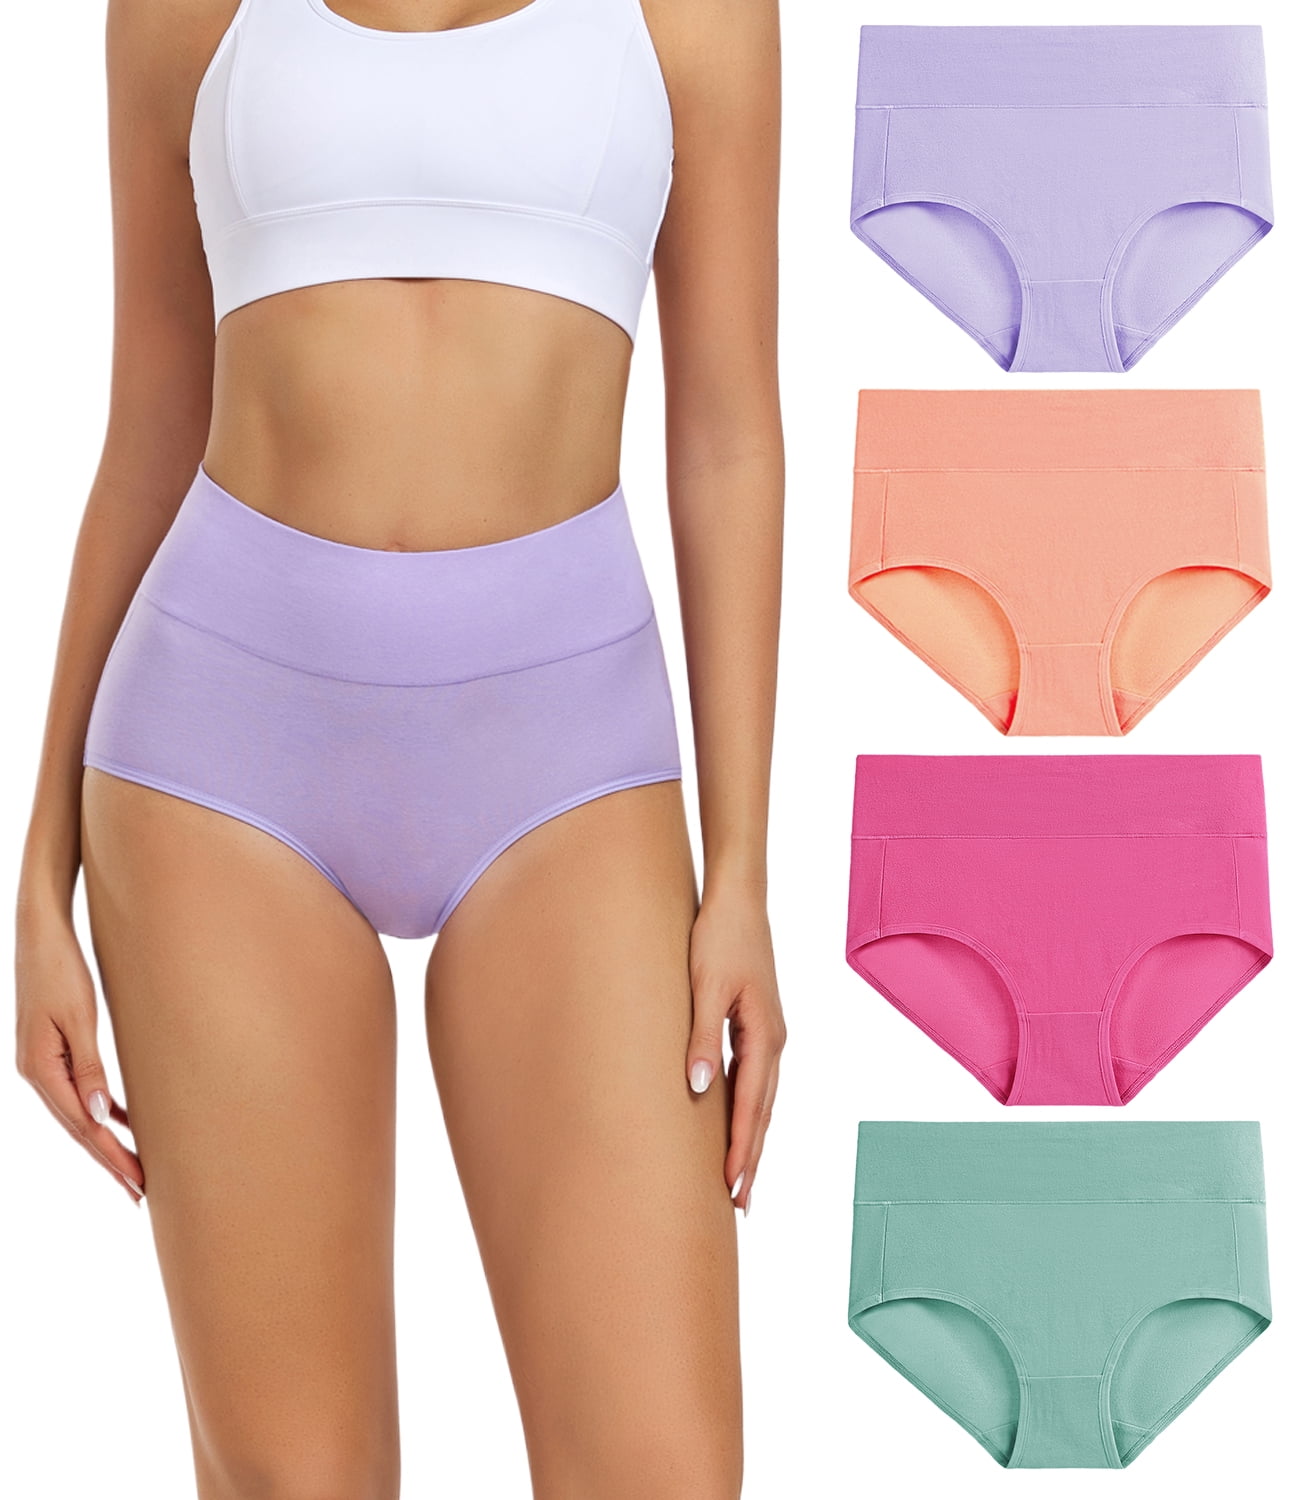 Wirarpa Women's Underwear High Waisted Full Coverage Cotton Briefs 4  Pack(M, Soothing Sea/Orange/Slate Rose/Lilac)